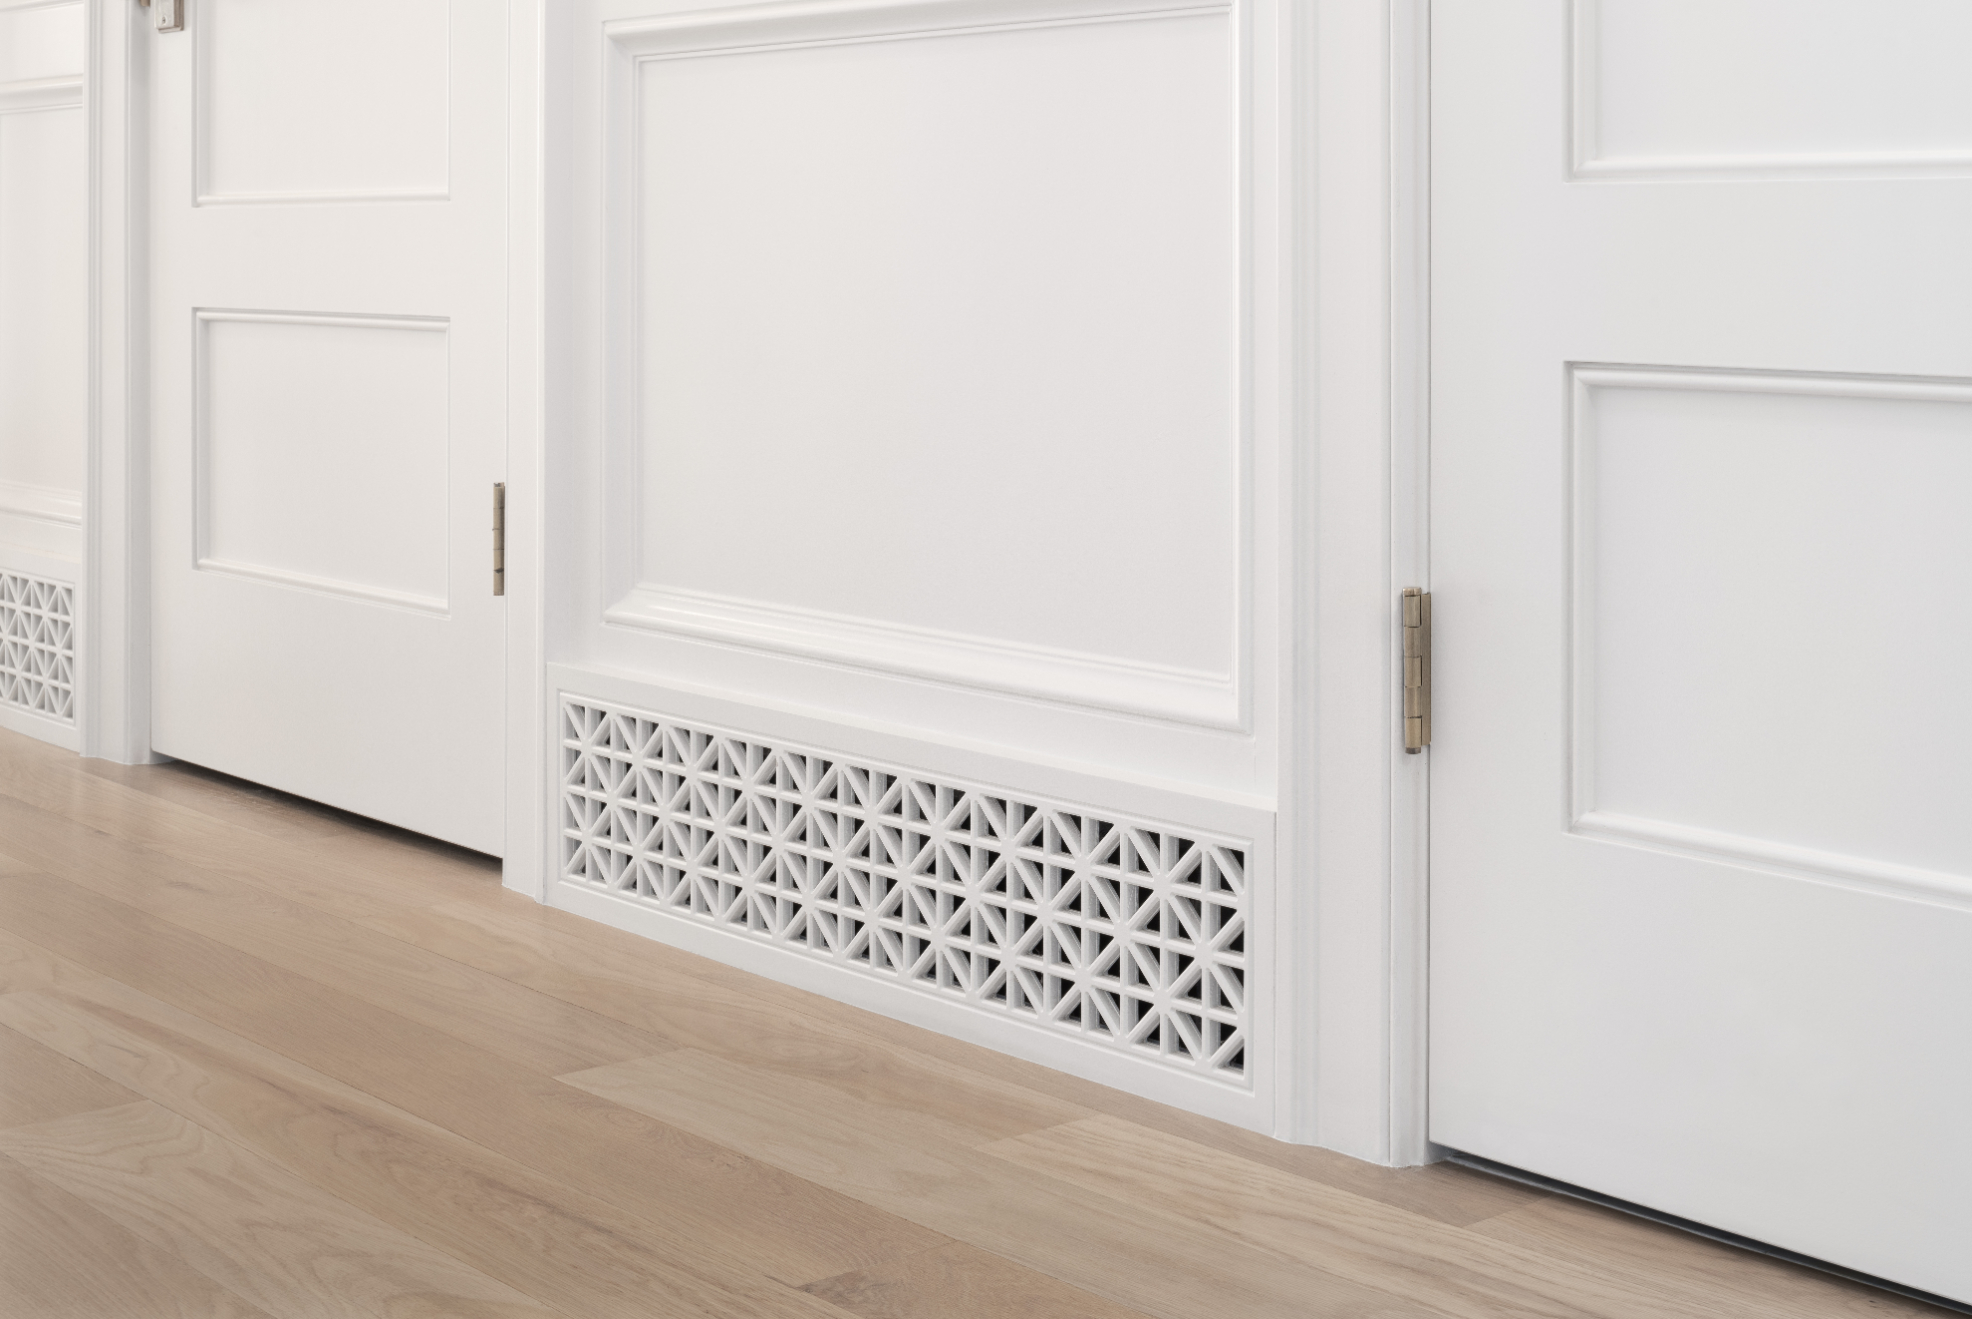 Common Air Return Vents Questions - Christopher Scott Cabinetry